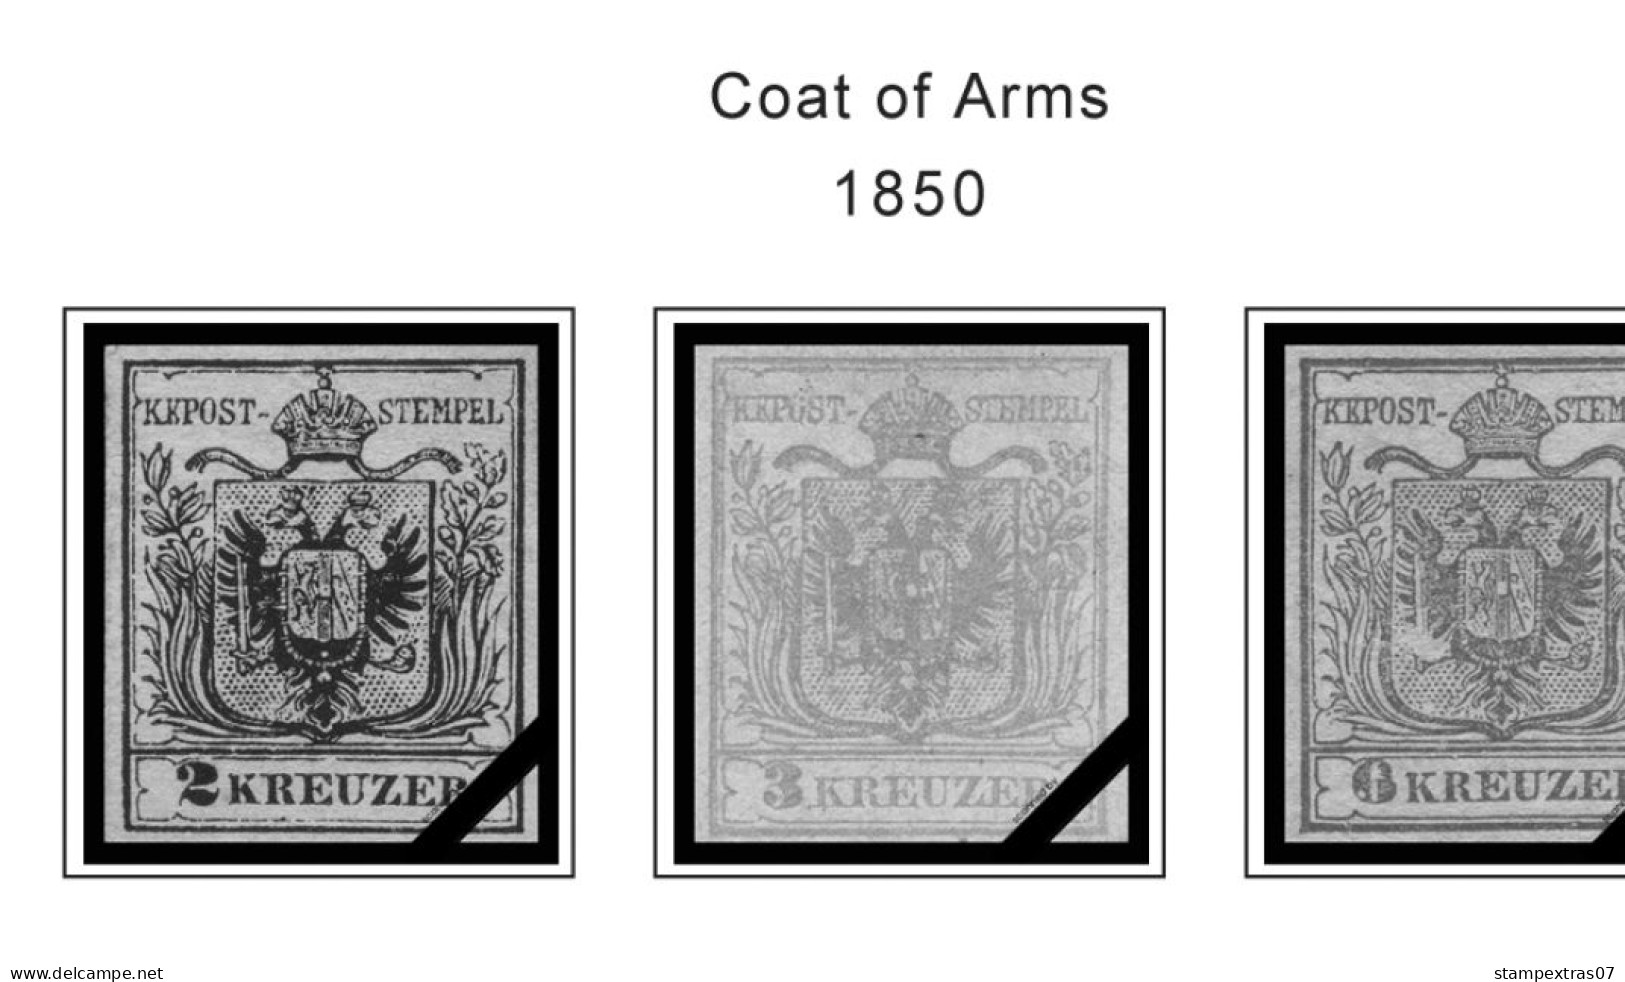 AUSTRIA 1850-2010 + 2011-2020 STAMP ALBUM PAGES (417 B&w Illustrated Pages) - Inglese